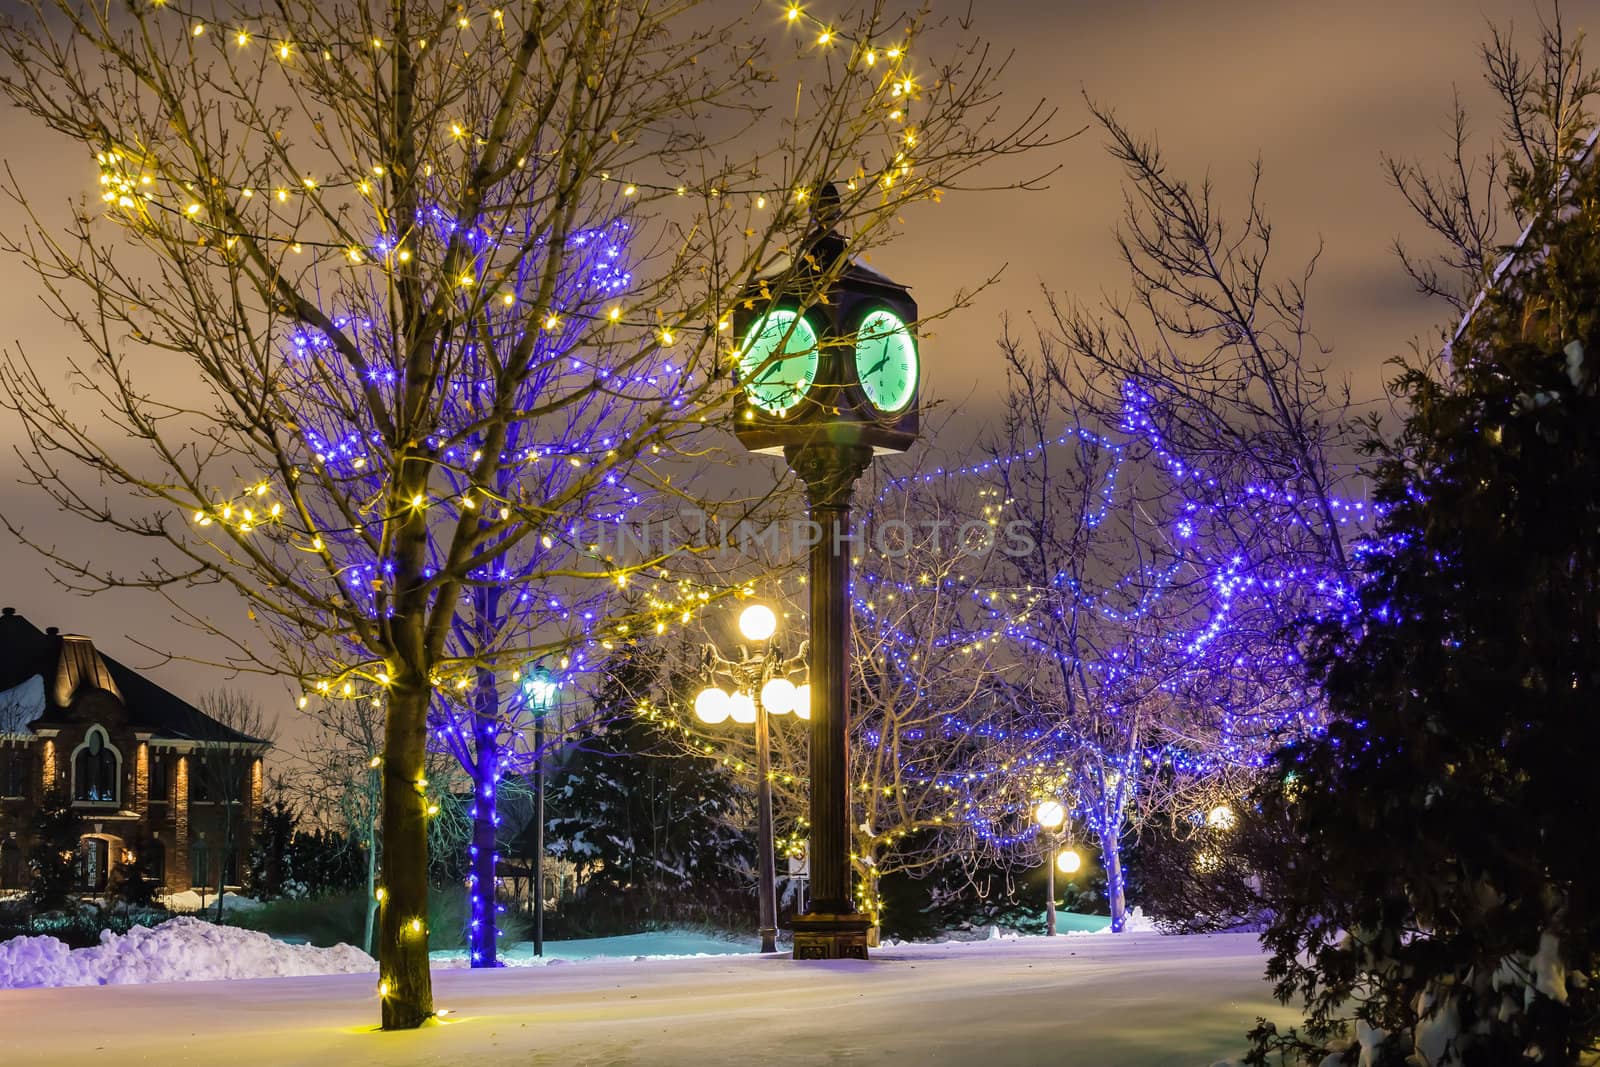  A beautiful old style green clock beside some amazing trees in a cold winter night in Quebec, Canada